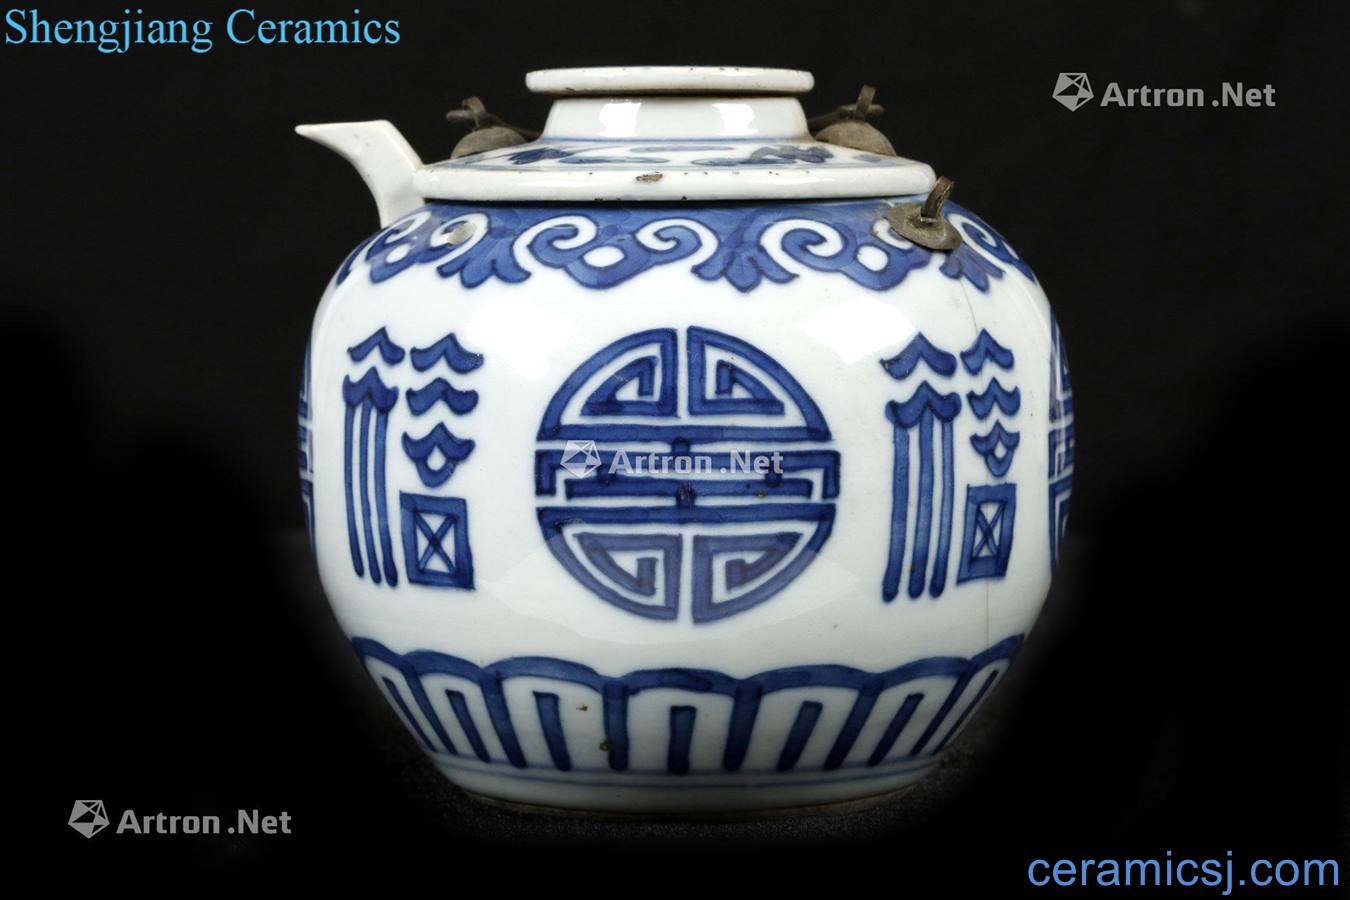 In the 19th century Blue and white live pot